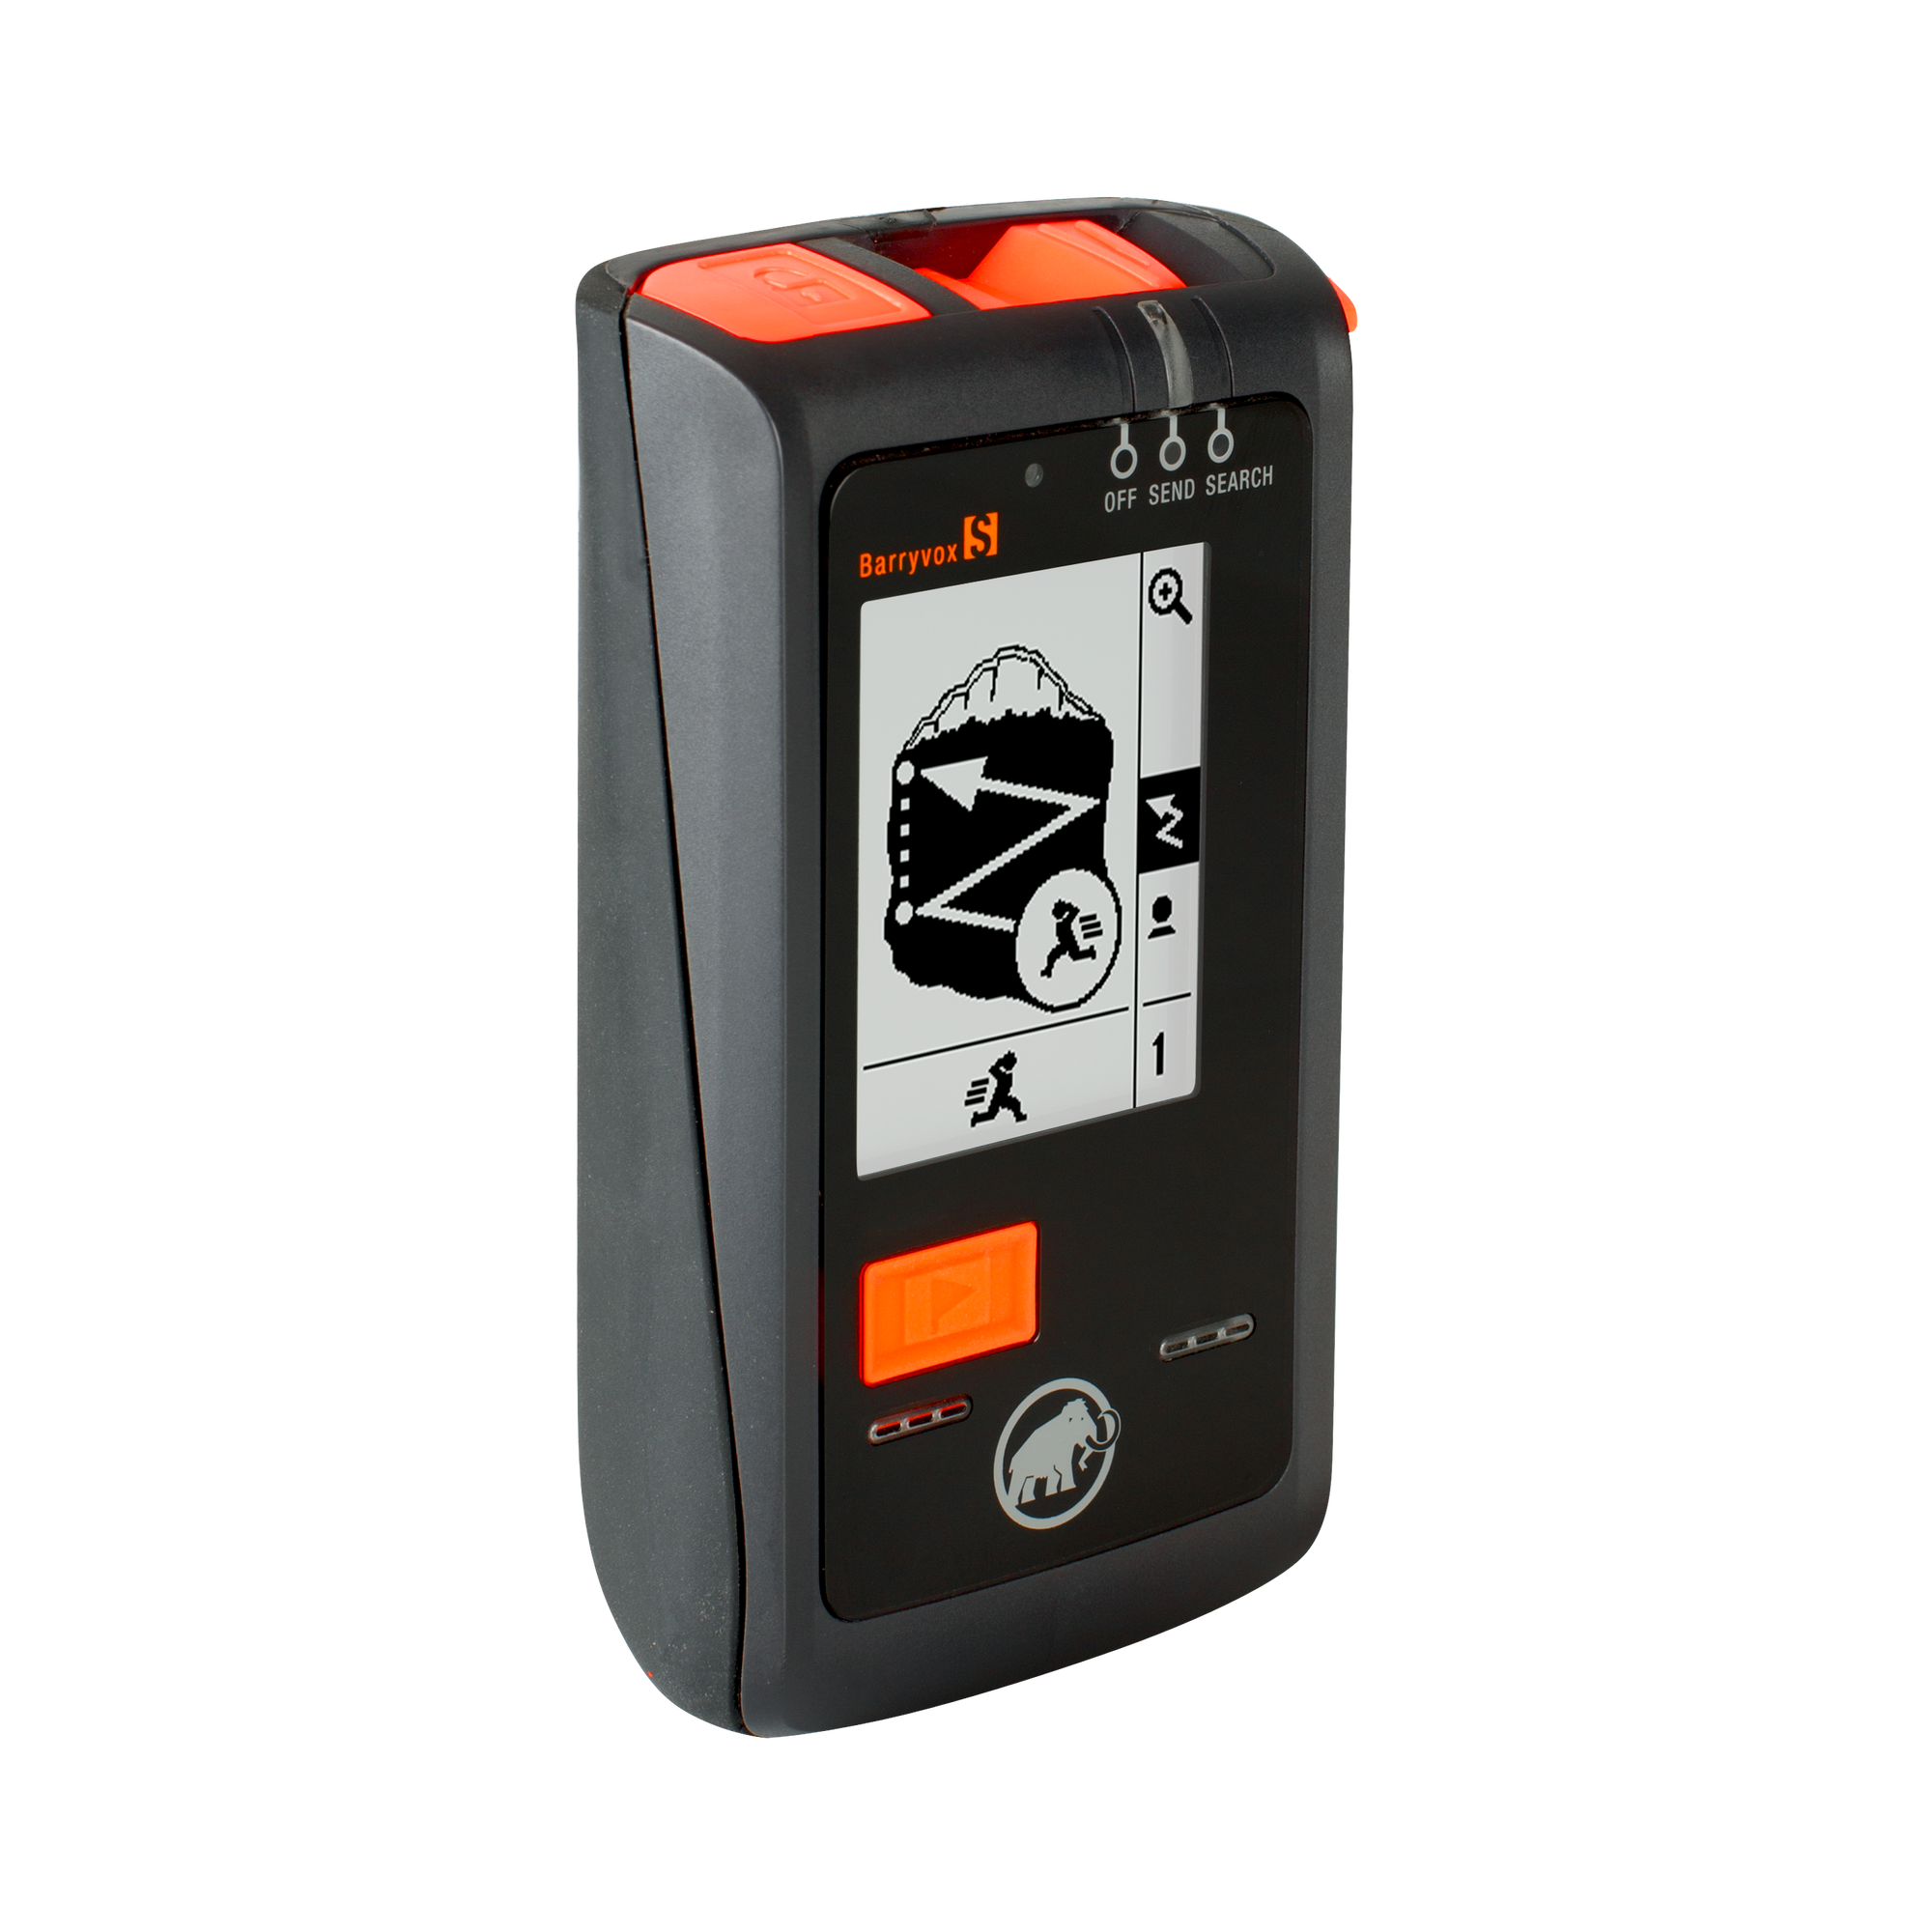 Mammut Barryvox S Avalanche Beacon side view